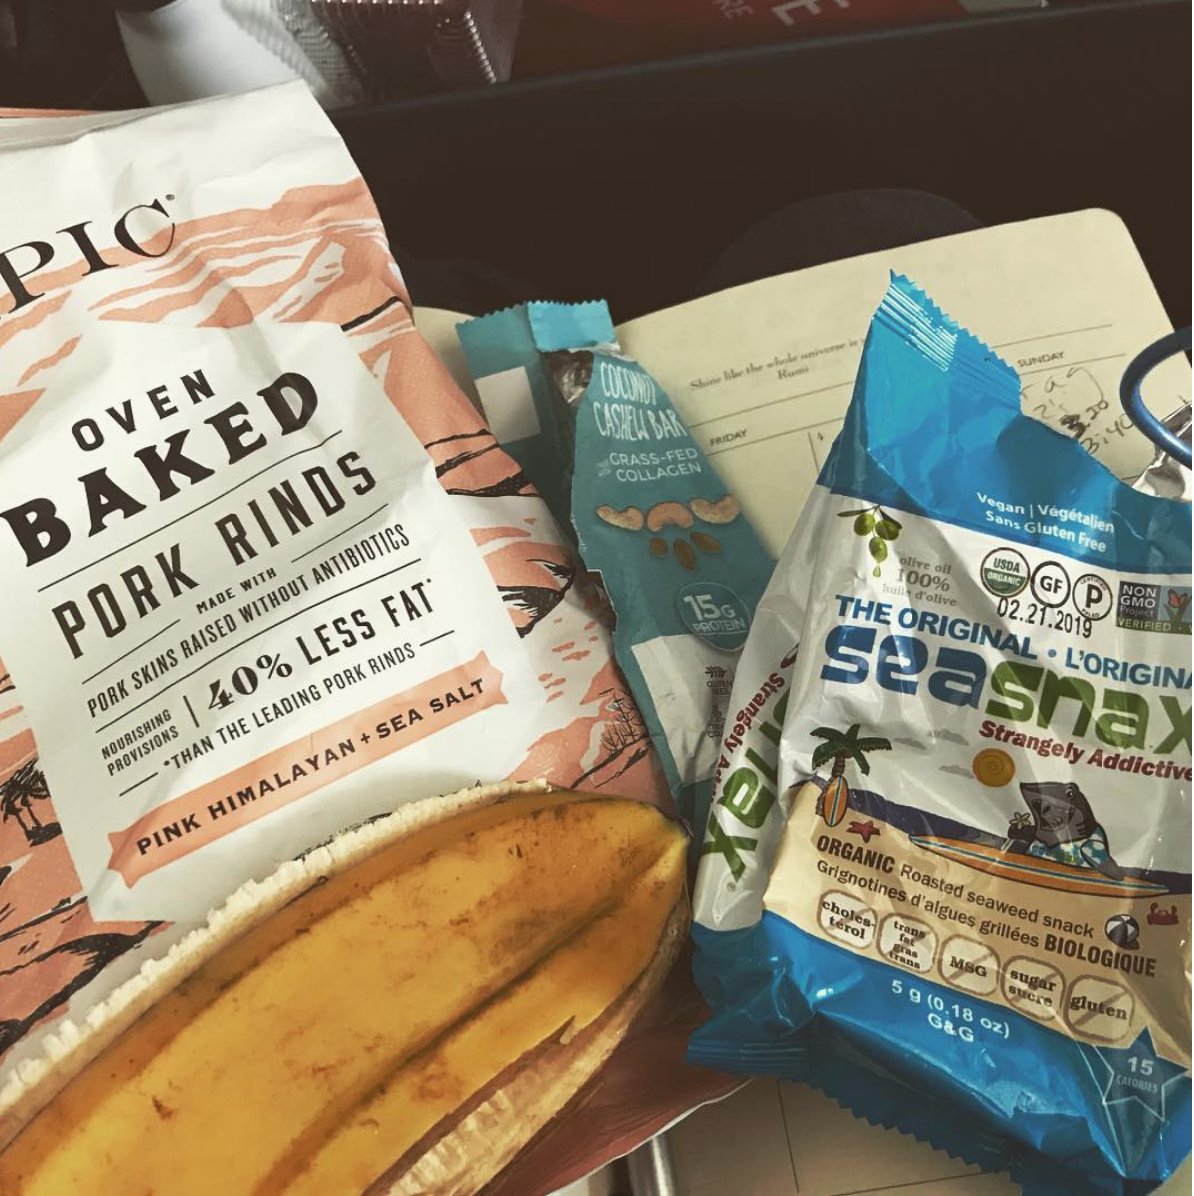 Airplane snacks from the lovely Lindsay bit.ly/2yksPS4 #Seasnax is happy to be included #paleolifestyle #epic #epicfood #primalkitchen #primalbars #seasnax #neverleavehomewithoutthem #neverleavehomewithoutit #travelsnacks #travelfood #glutenfreelife #glutenfree #banana